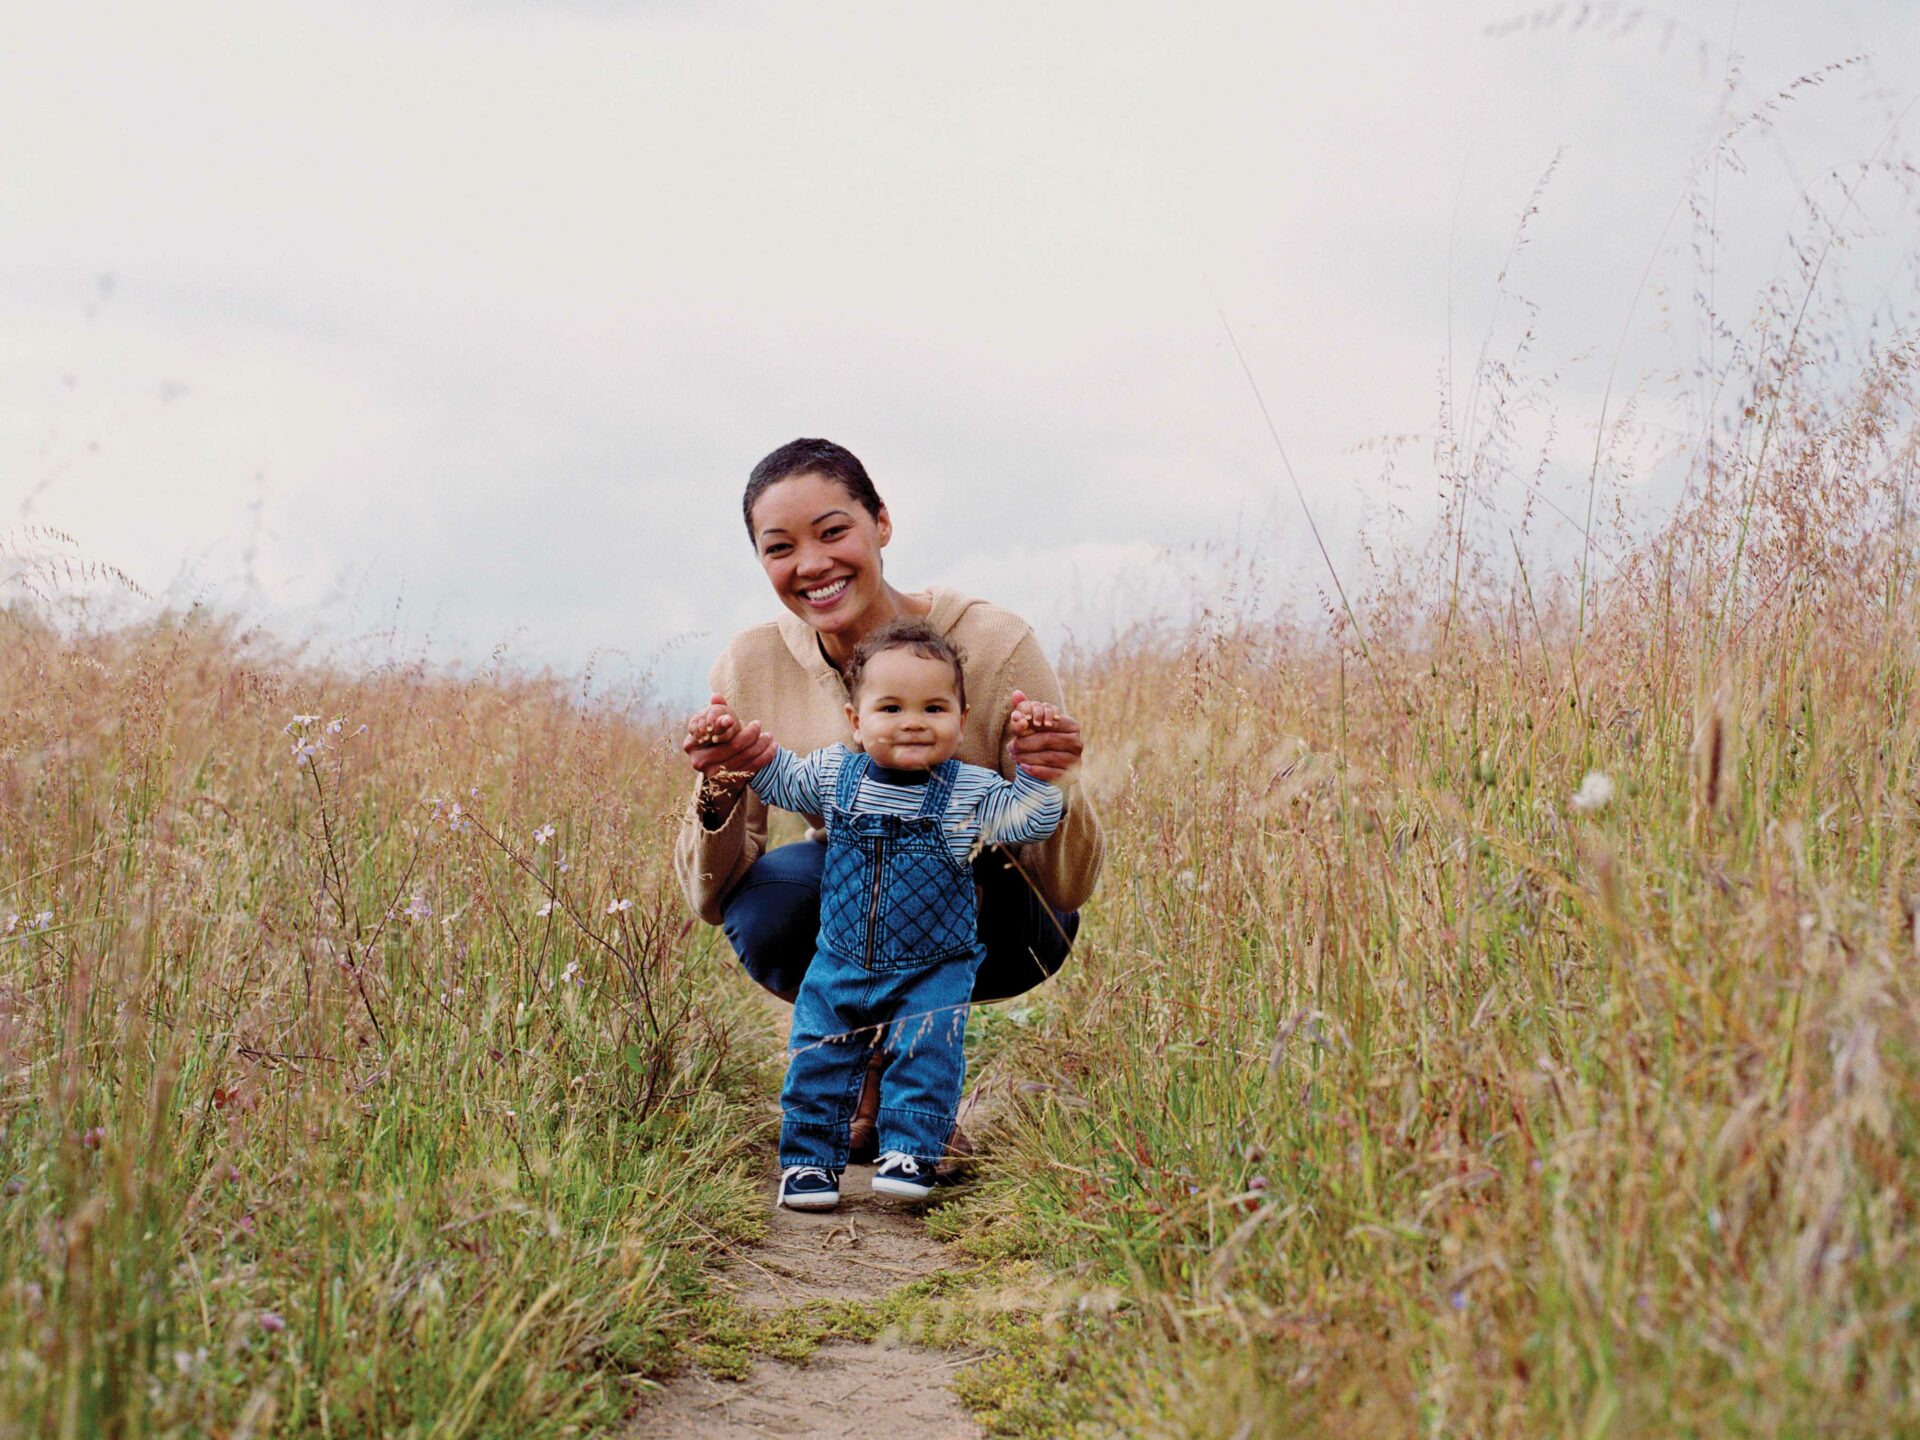 A young mom and her young son crouch together along a trail through tall grass.